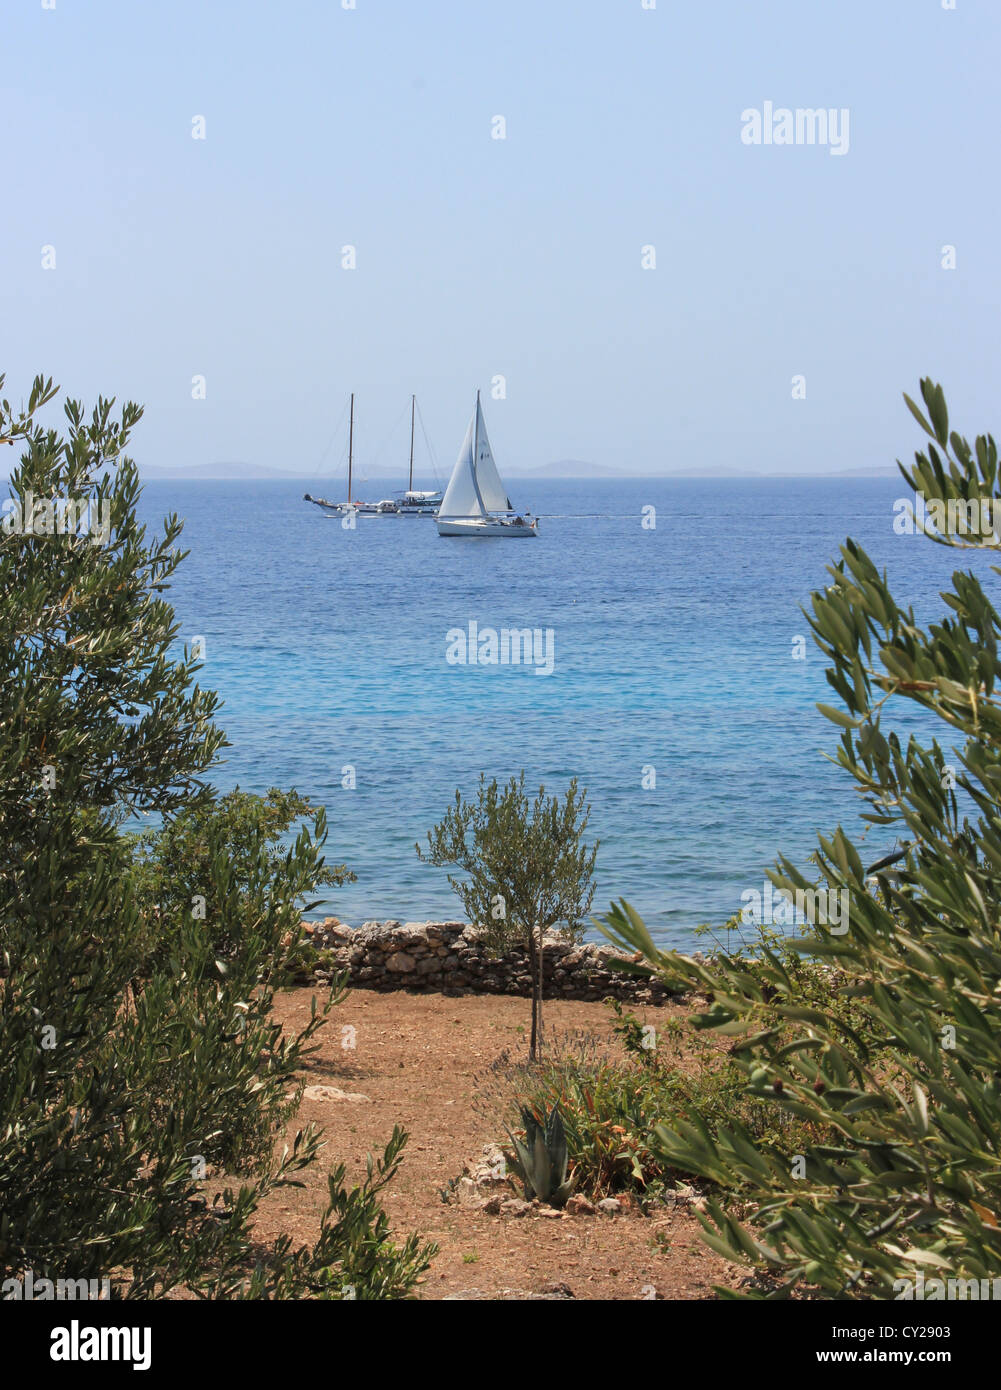 Adriatic seascape with olive trees and sailboats Stock Photo